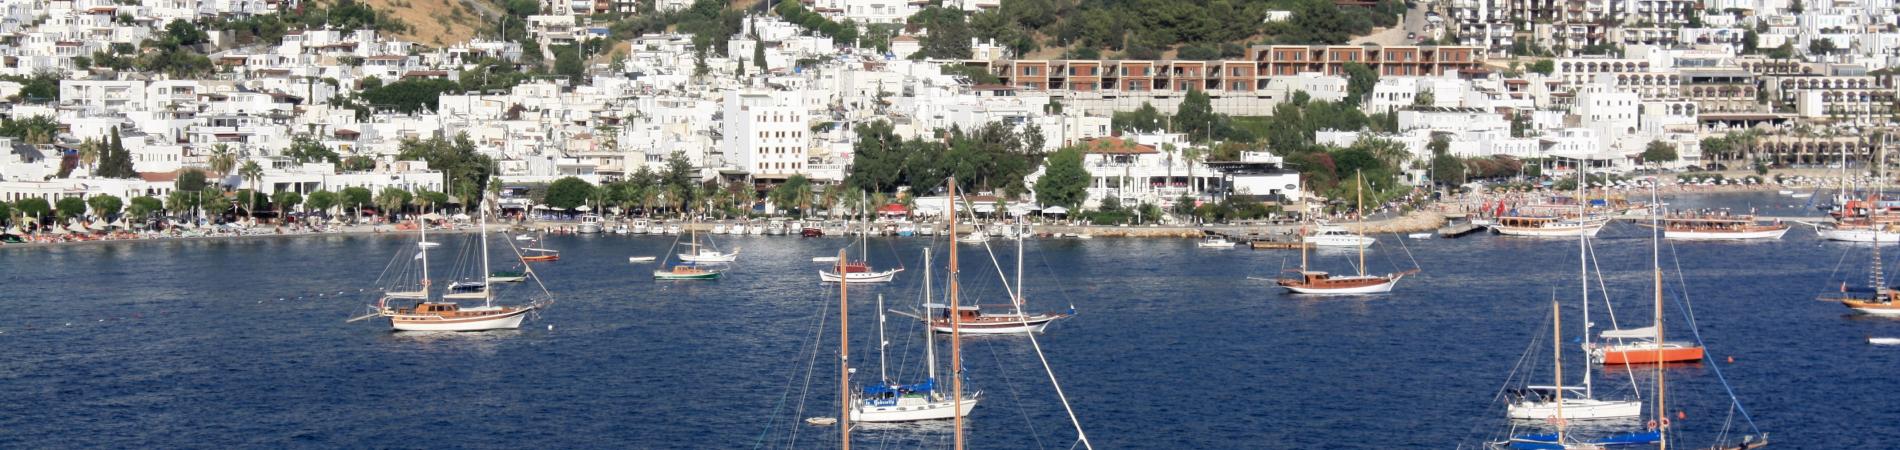 Image for Things to do in Bodrum